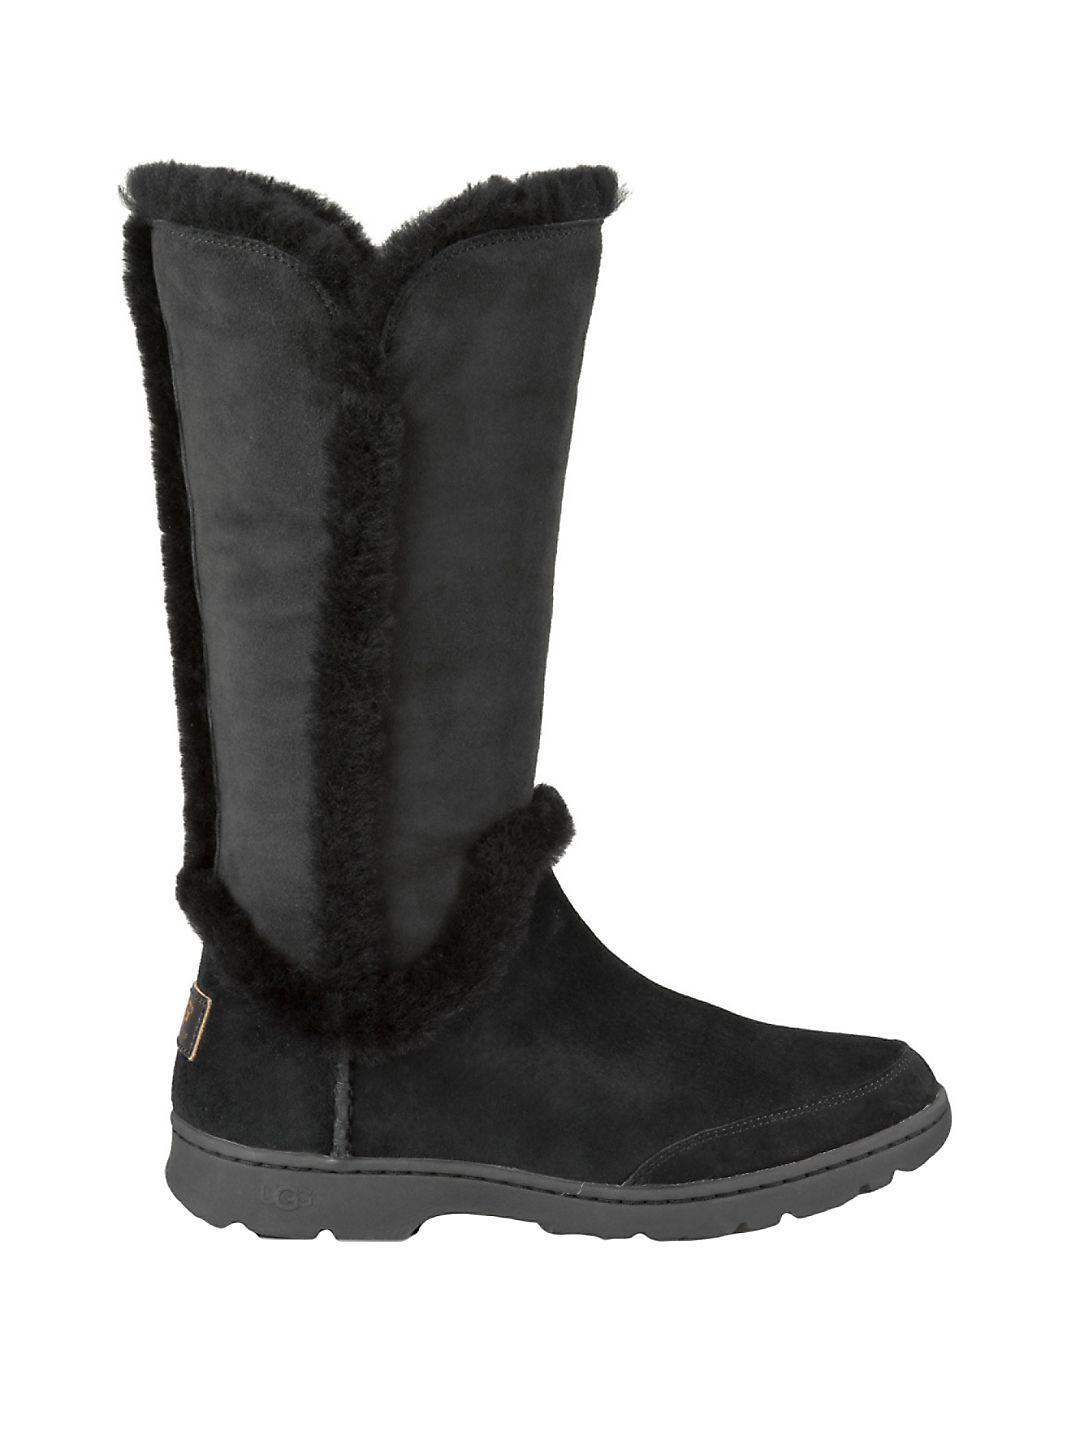 Lyst - Ugg Katia Suede, Shearling & Faux Fur Boots in Black